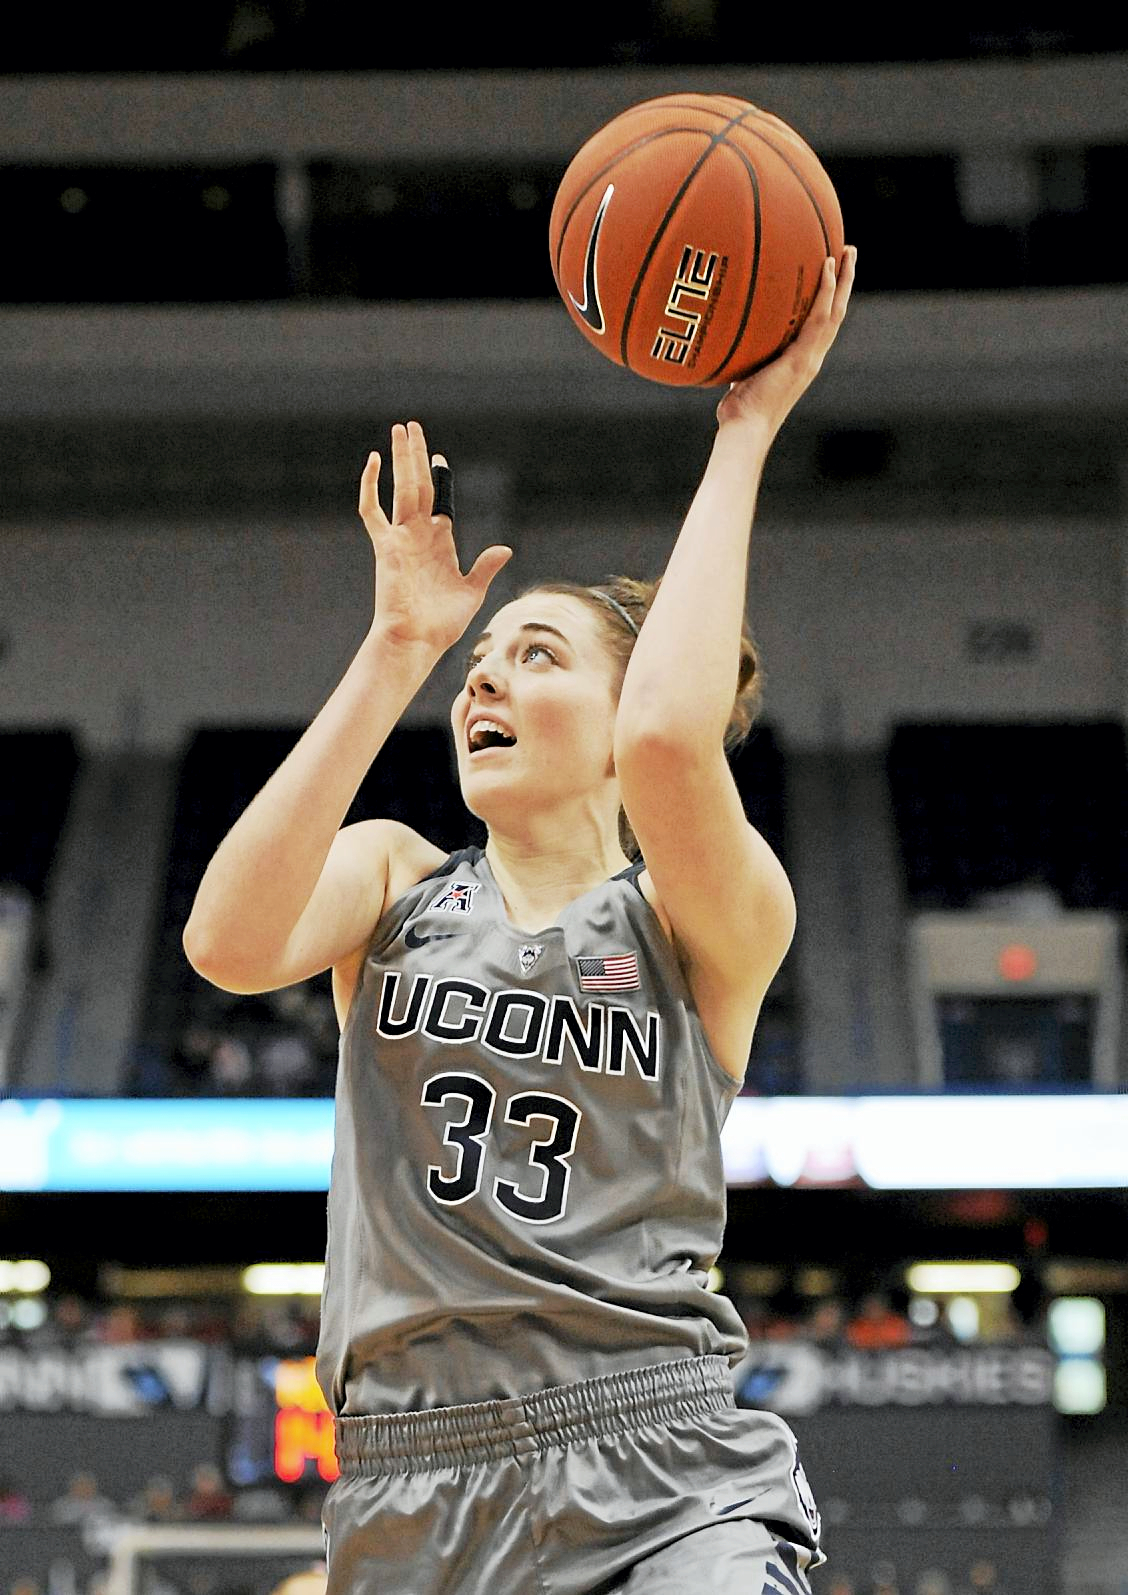 UConn freshman Katie Lou Samuelson rounding out her game